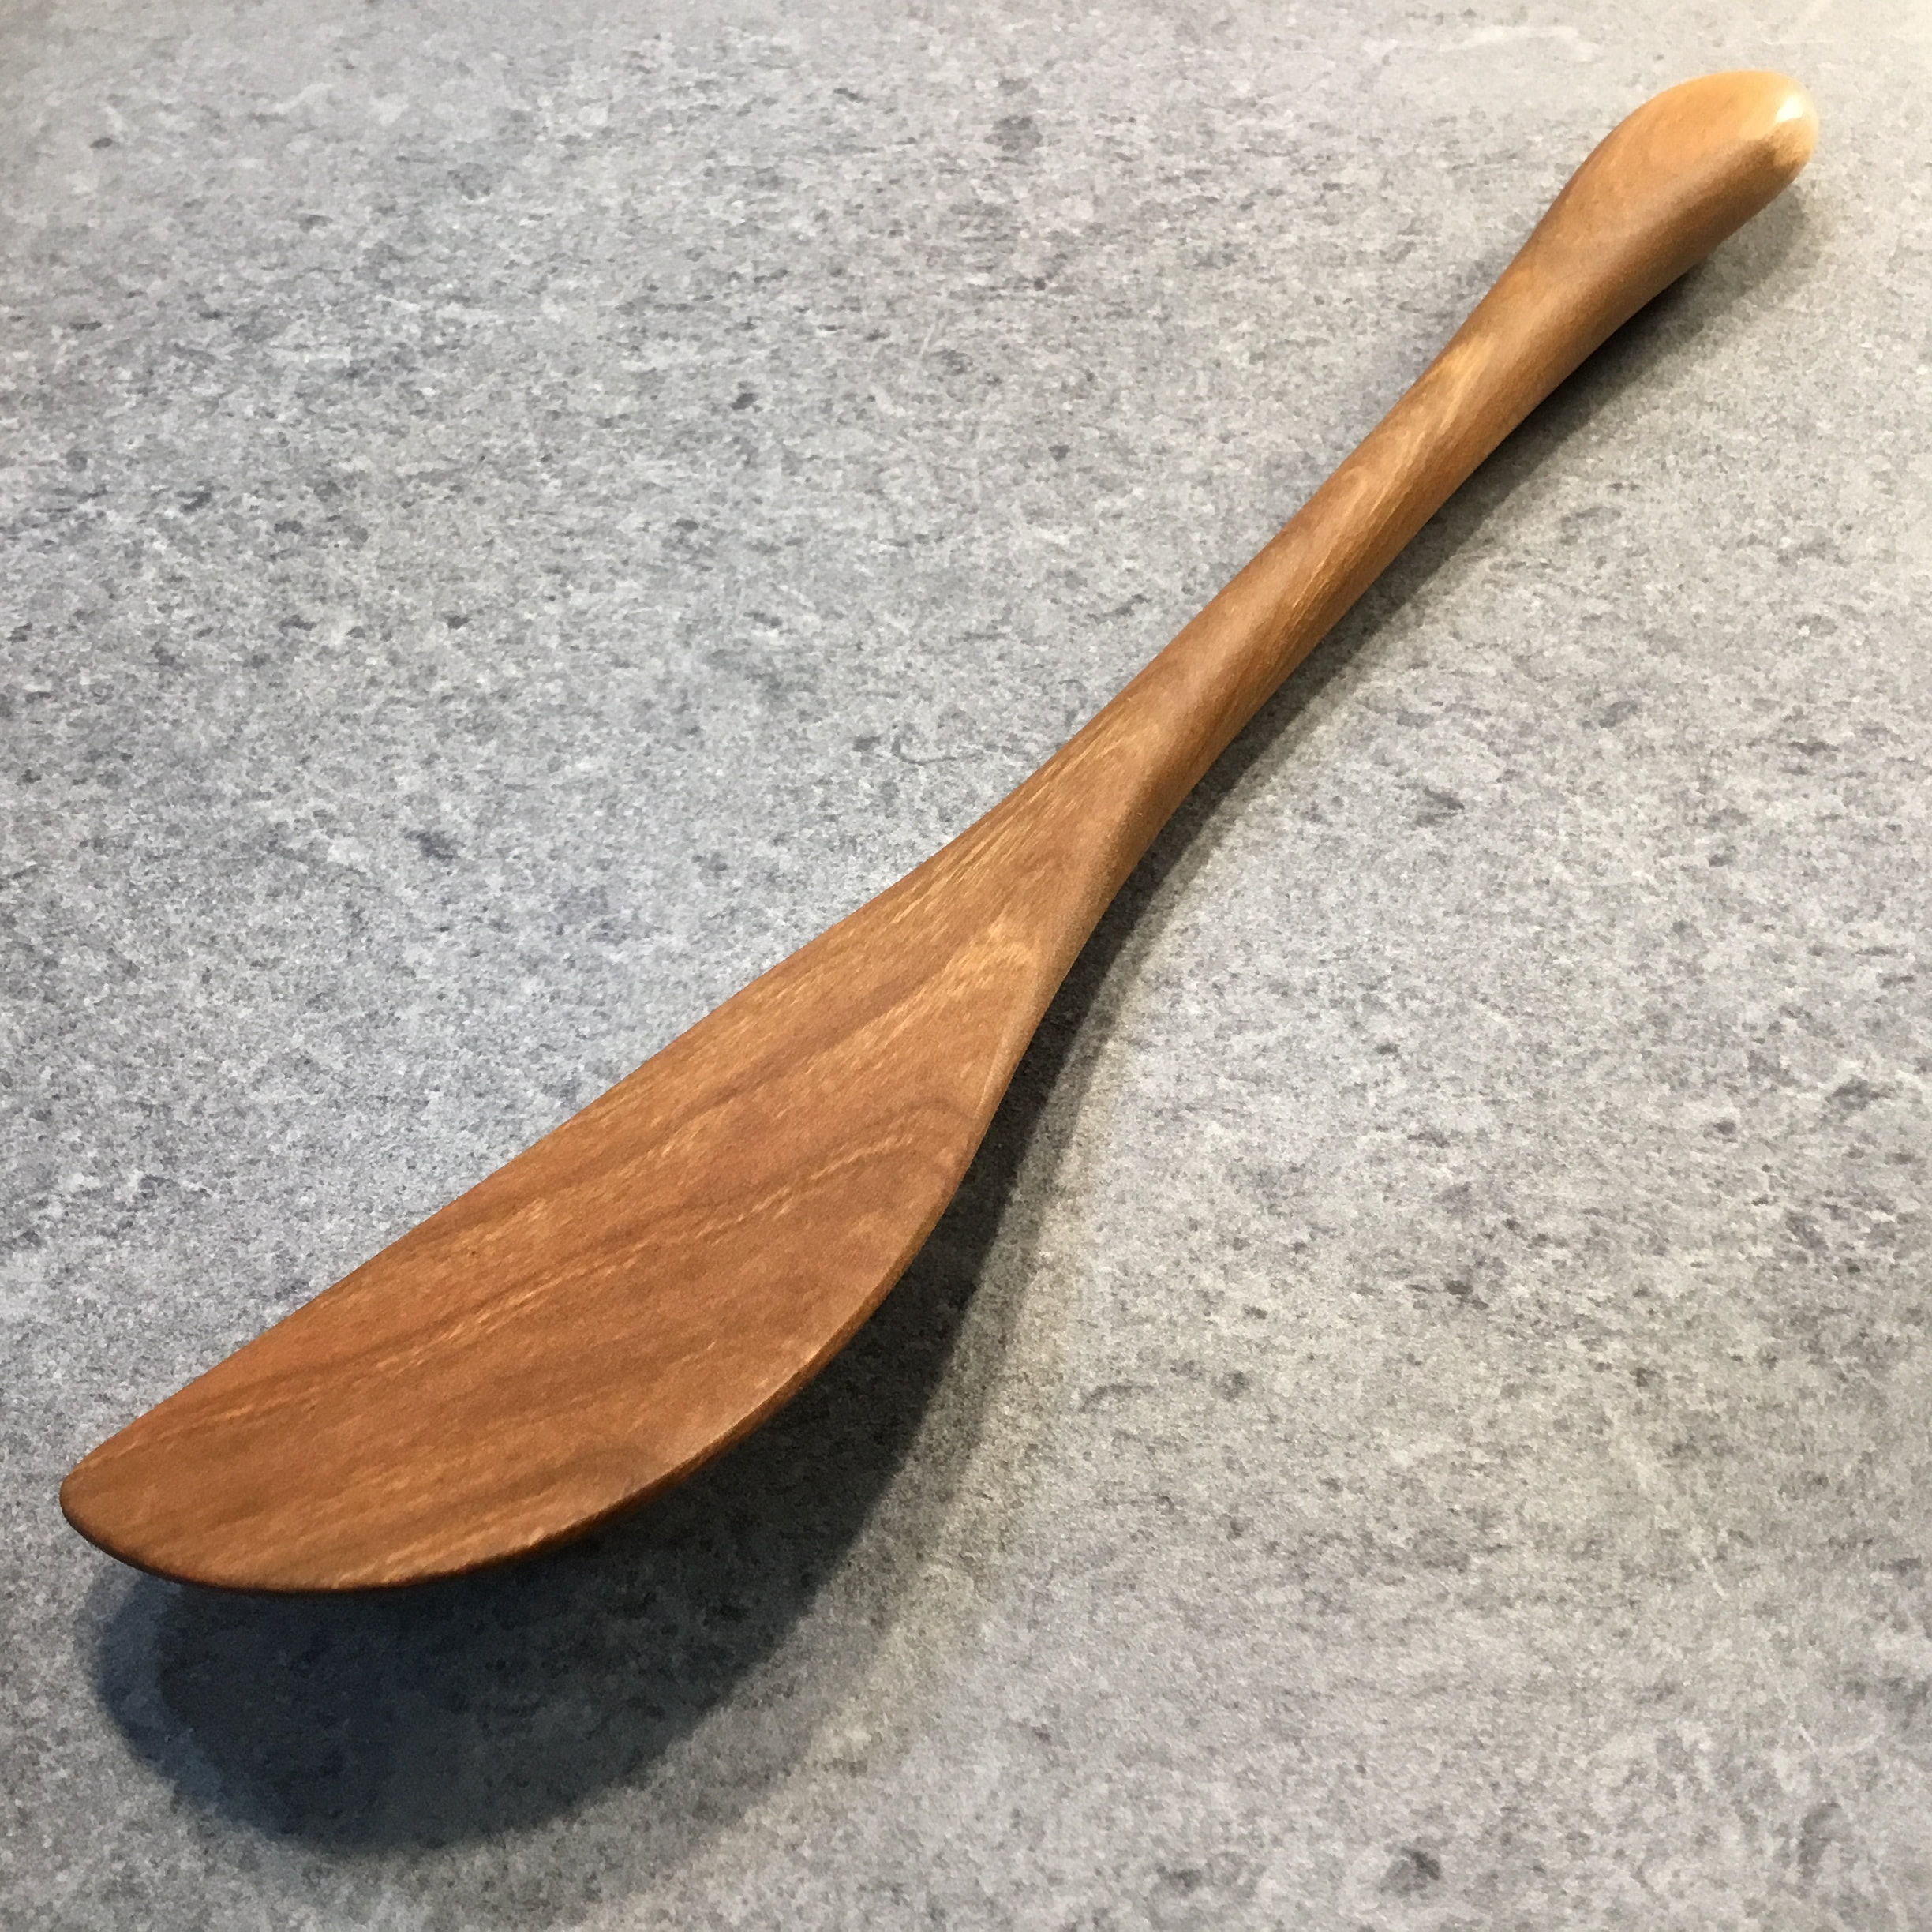 12” Spoon and Spatula Combination Stirring Cooking Hand Carved Spoonula Handmade Wooden Hanging Corner Spoon Made in the USA with Pennsylvania Black Cherry Wood and Serving Spoons 